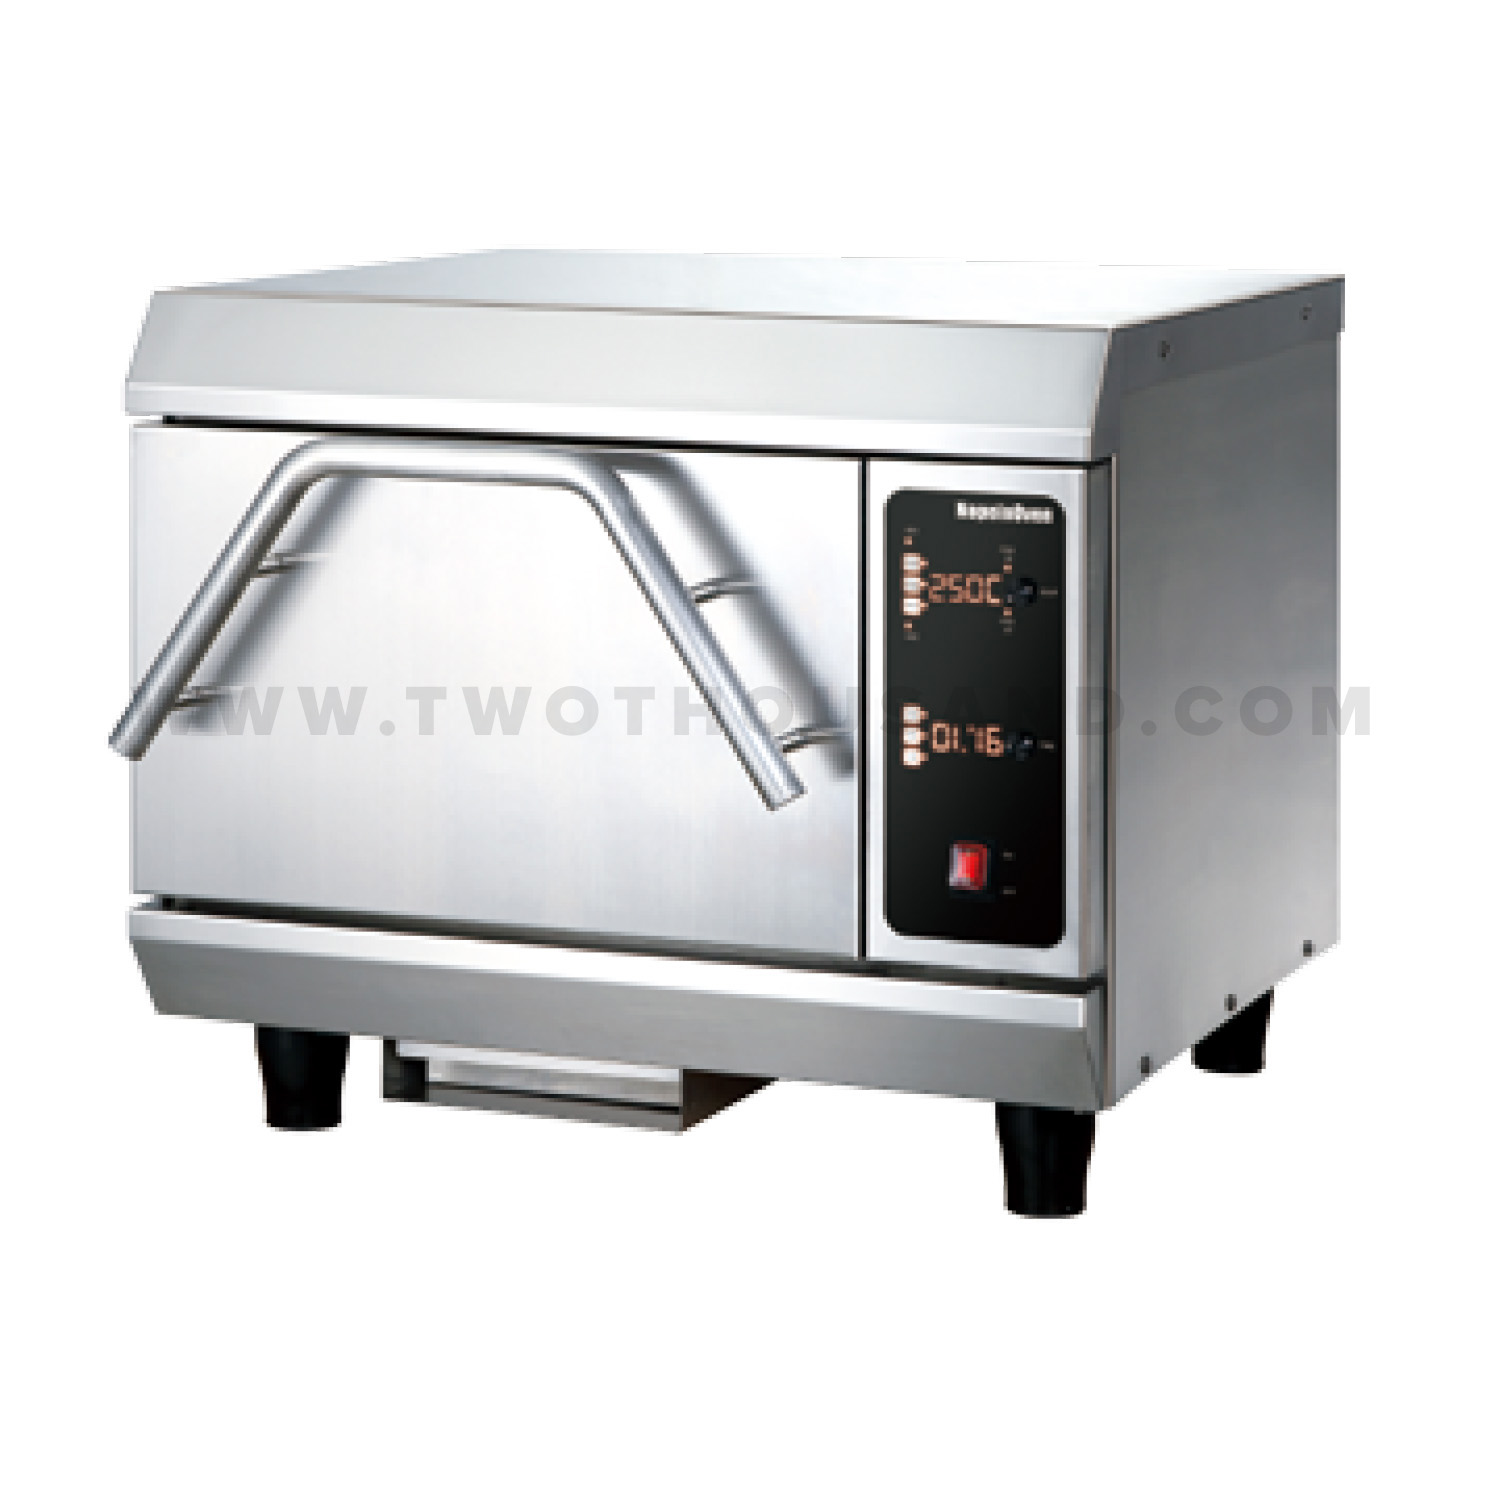 Rapid Microwave Cook Oven